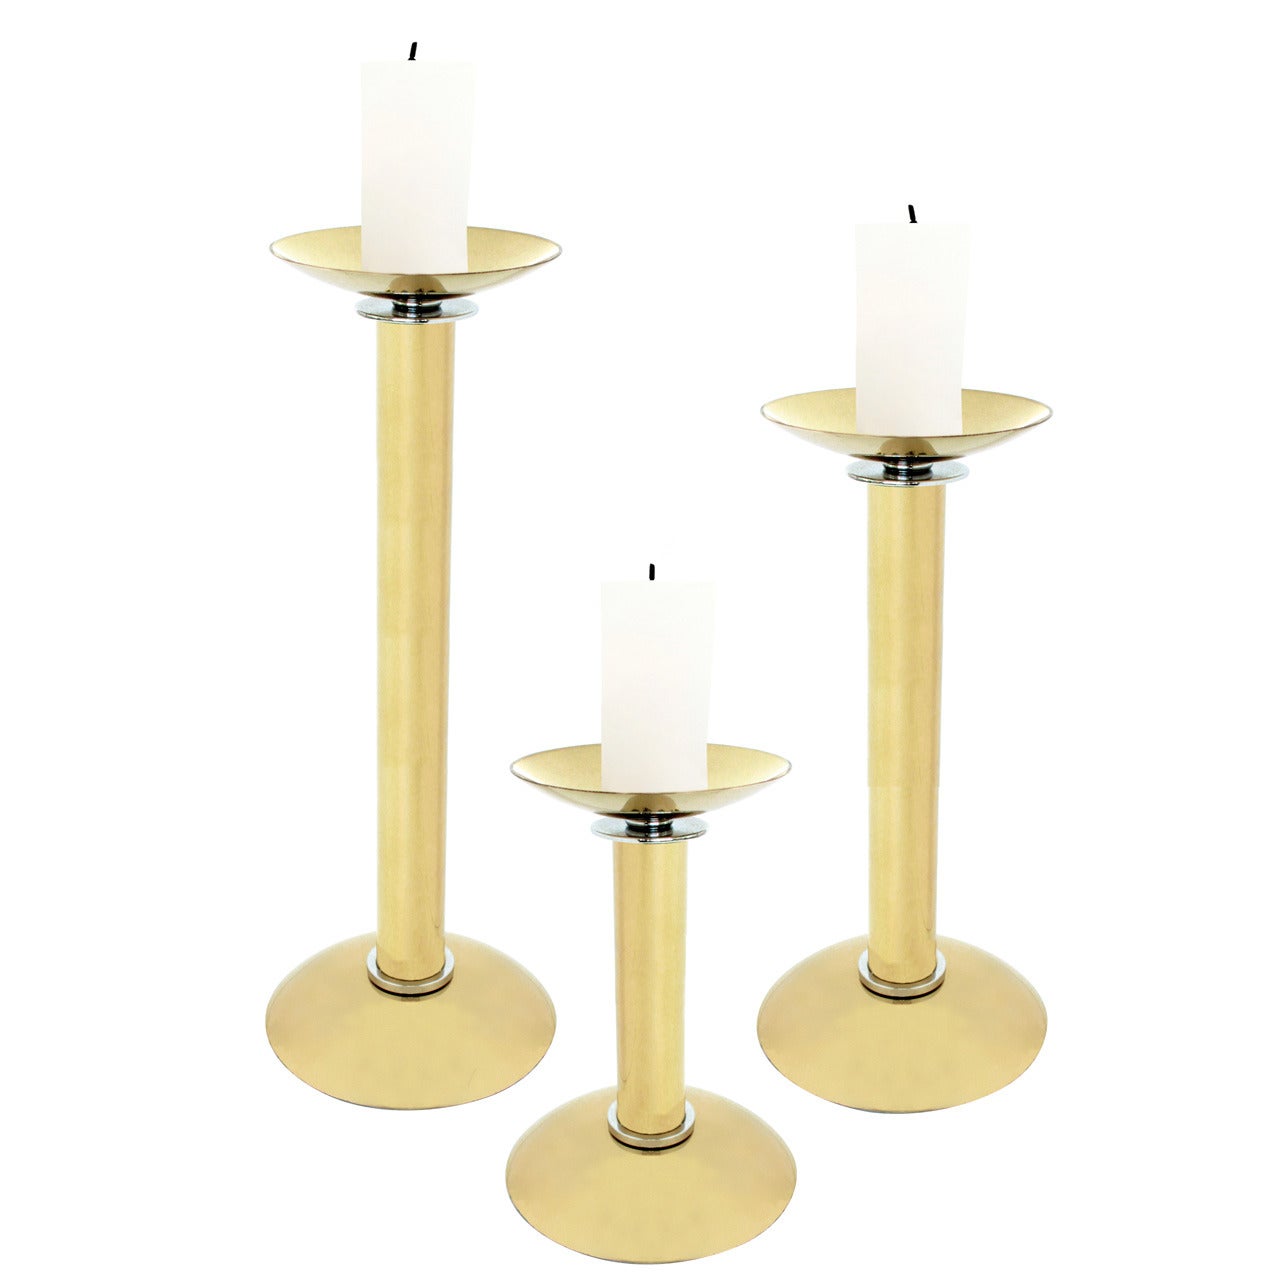 Set of Three Brass Candleholders by Karl Springer